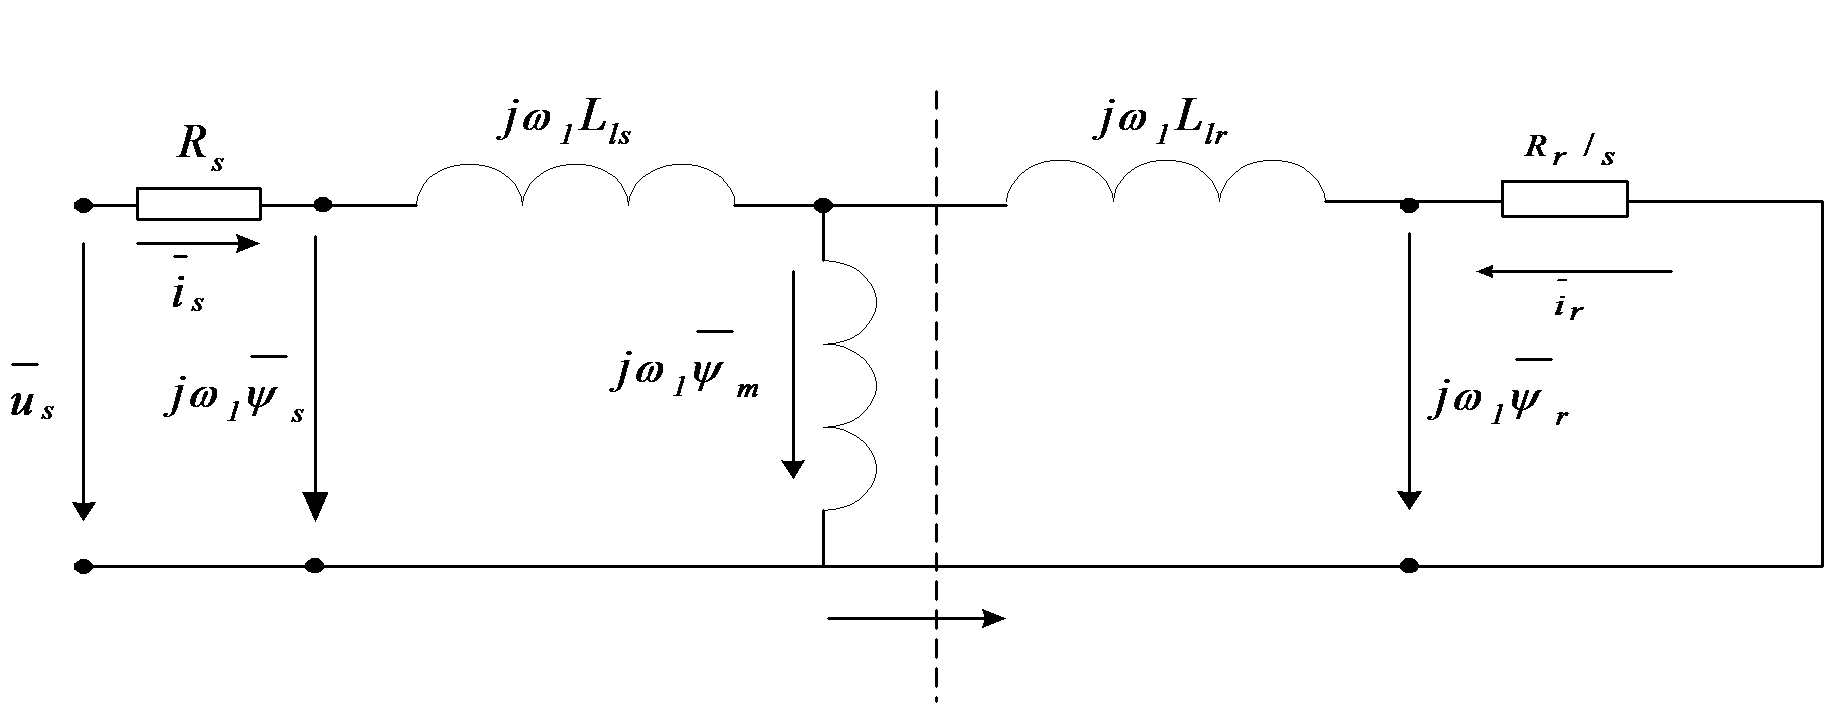 Equivalent circuit of the AC motor in normal operation